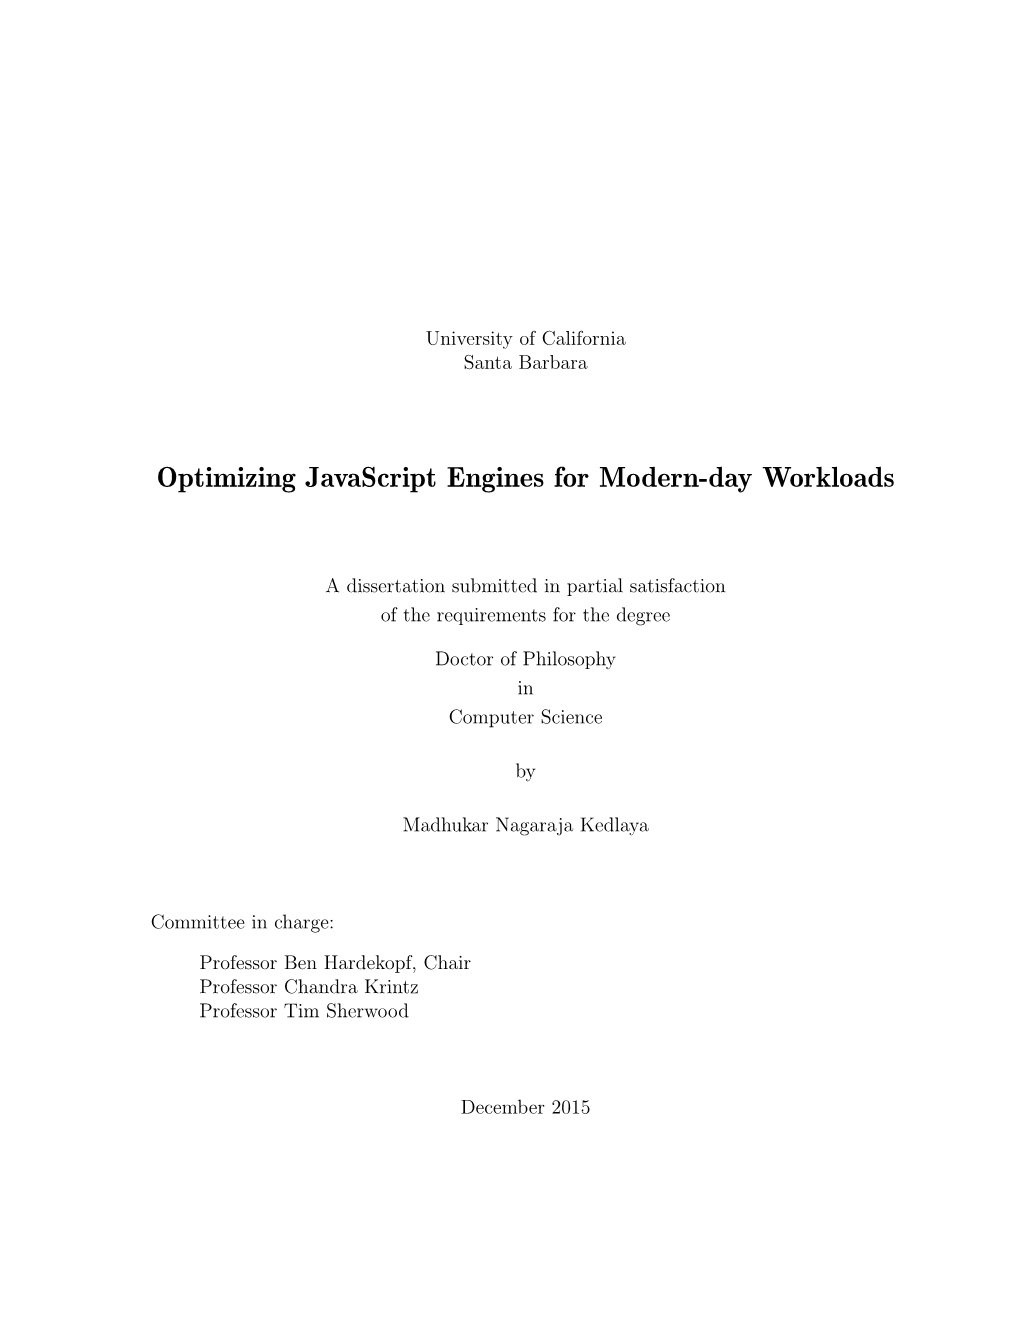 Optimizing Javascript Engines for Modern-Day Workloads